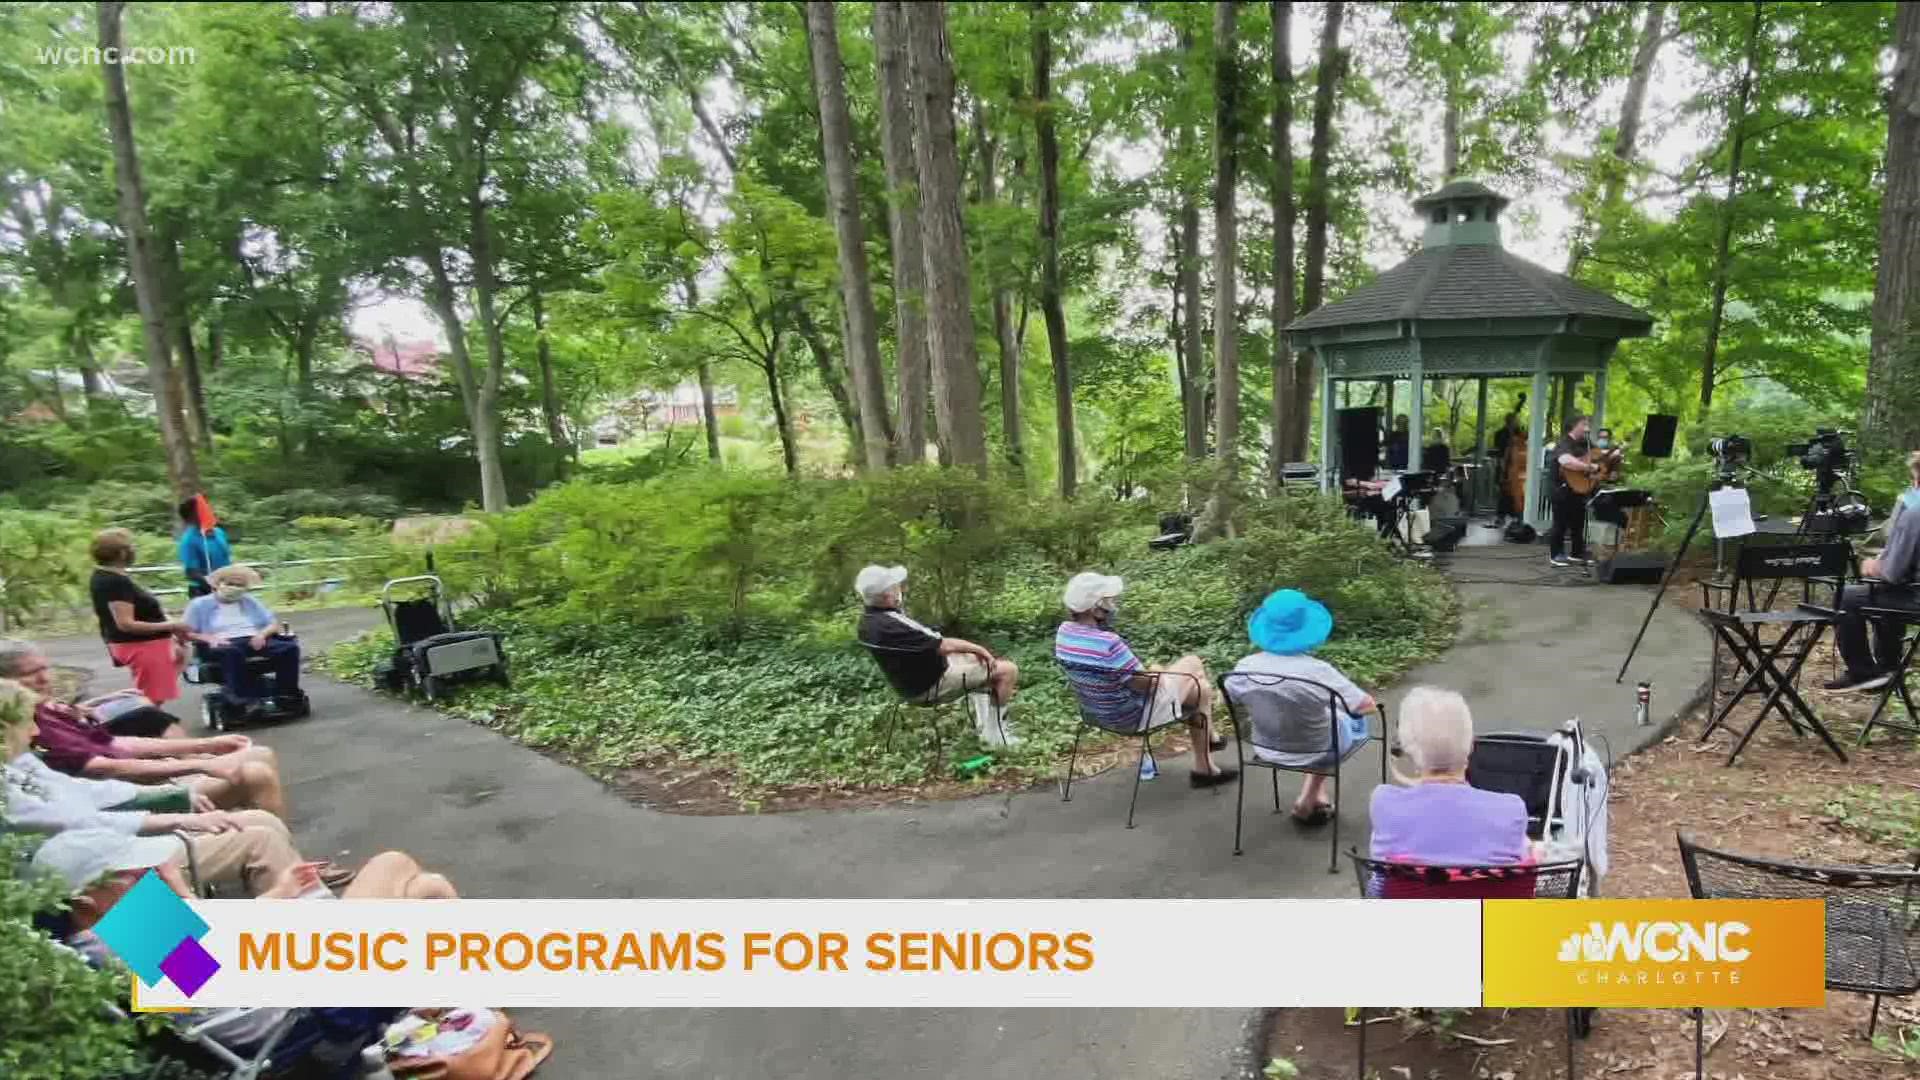 Tosco Music has a variety of programs and events for seniors to enjoy